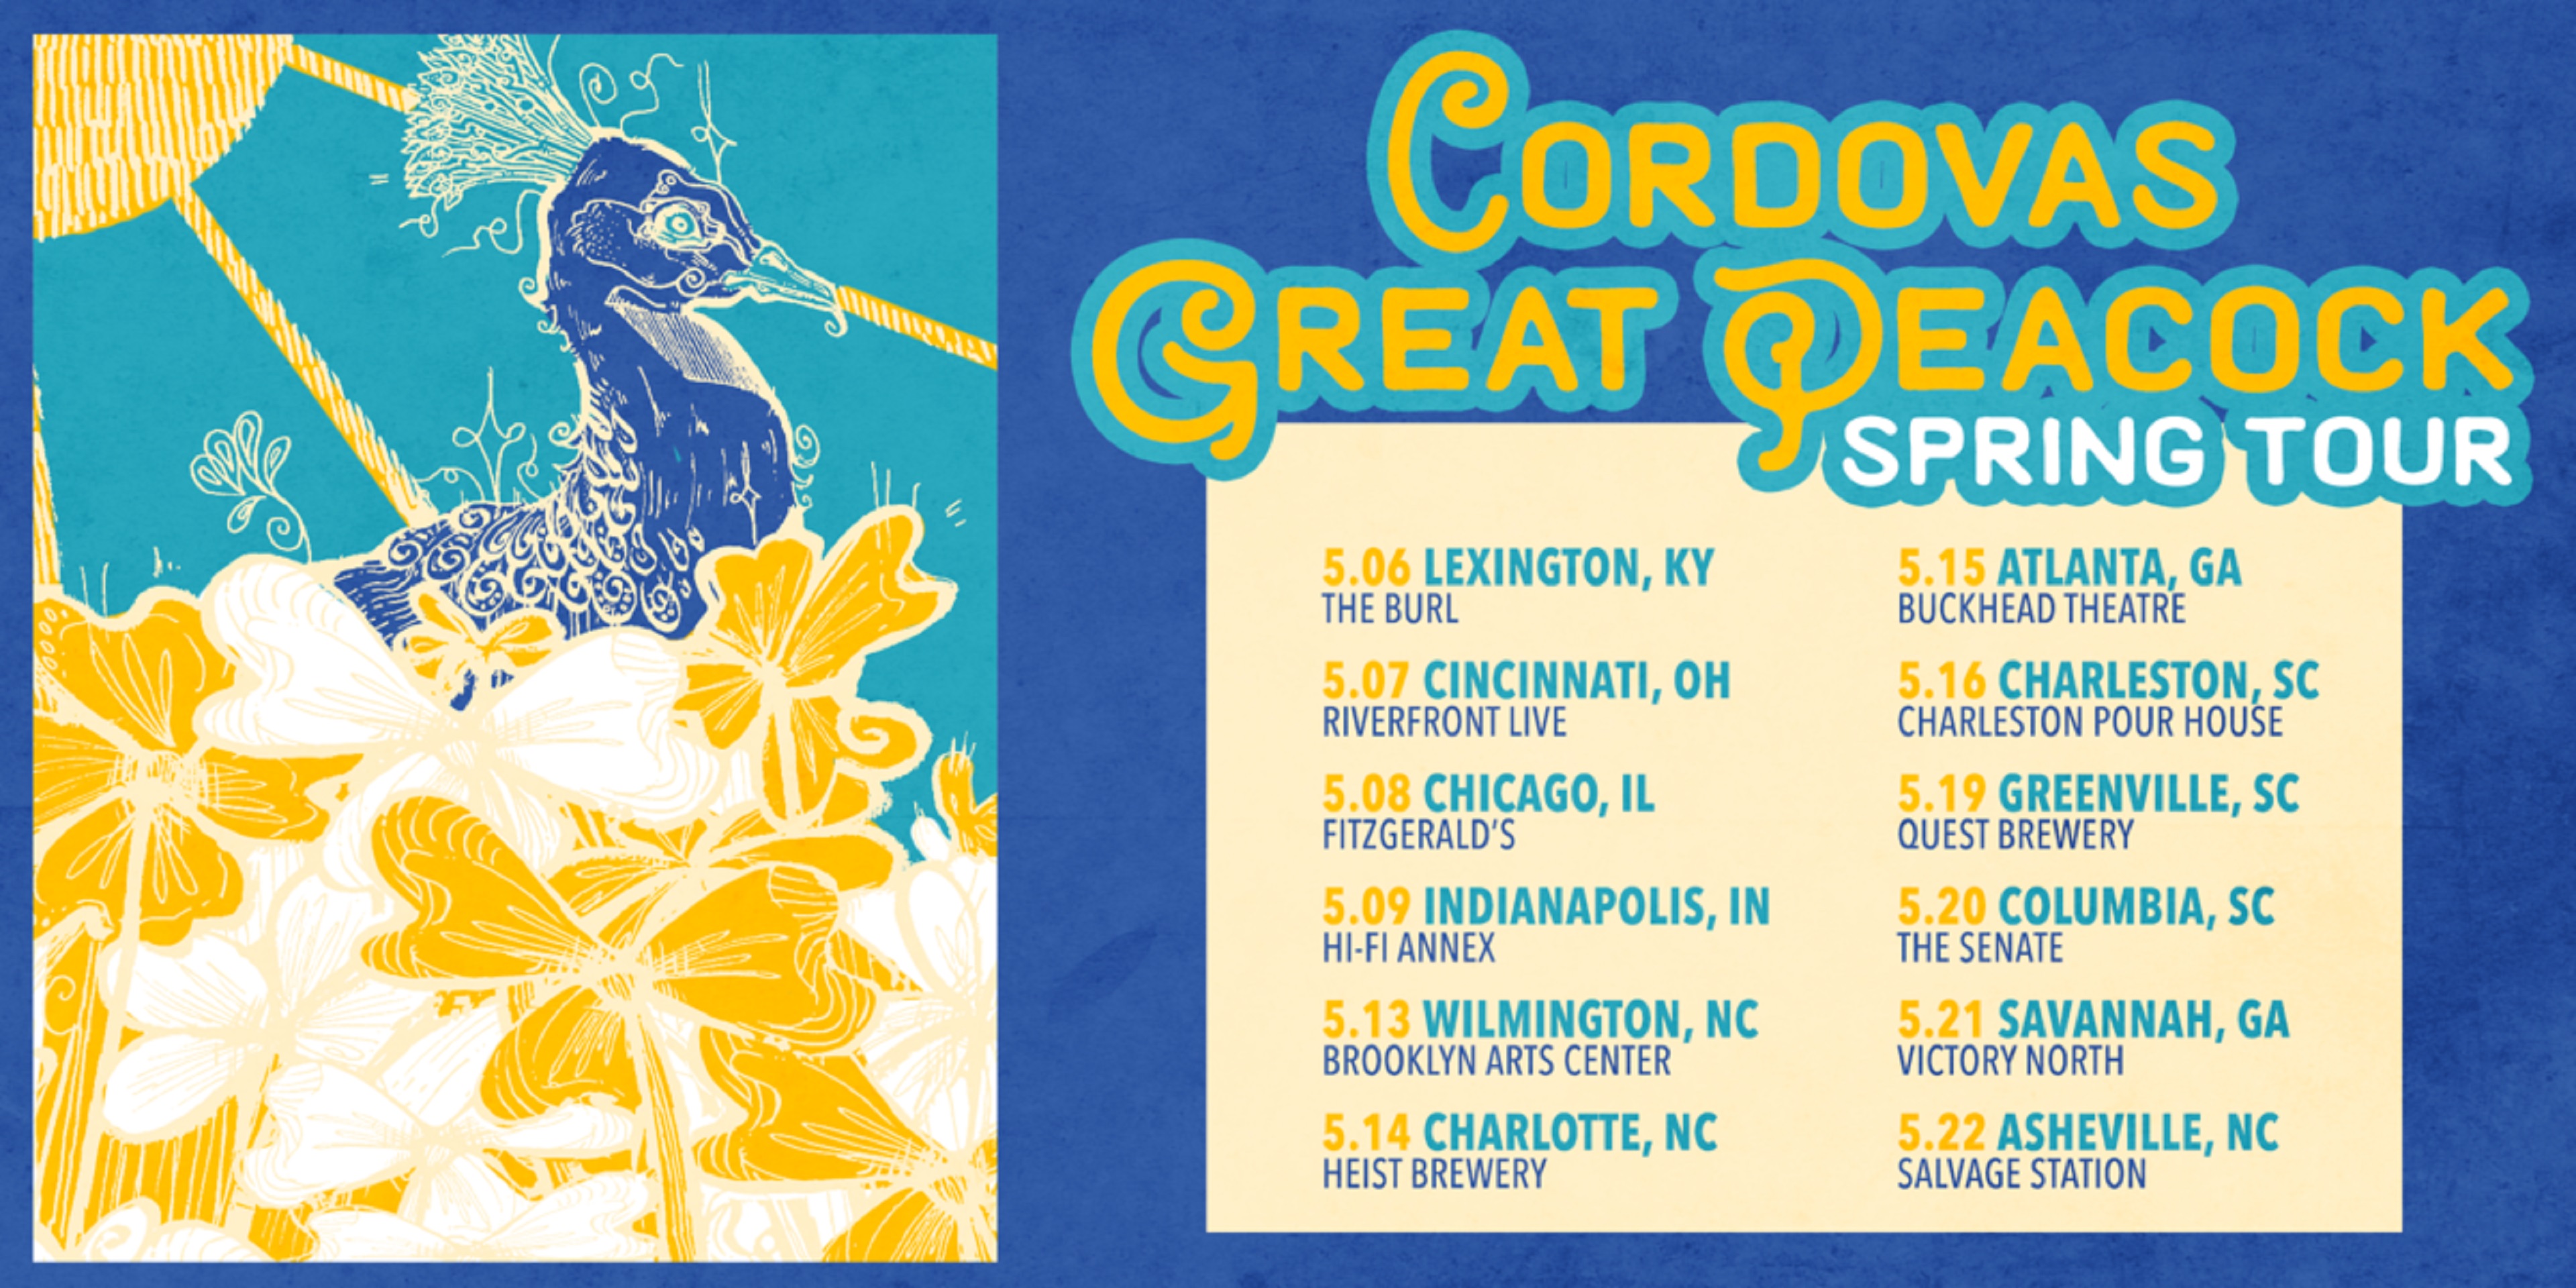 GREAT PEACOCK ANNOUNCE SPRING CO-HEADLINING TOUR WITH CORDOVAS